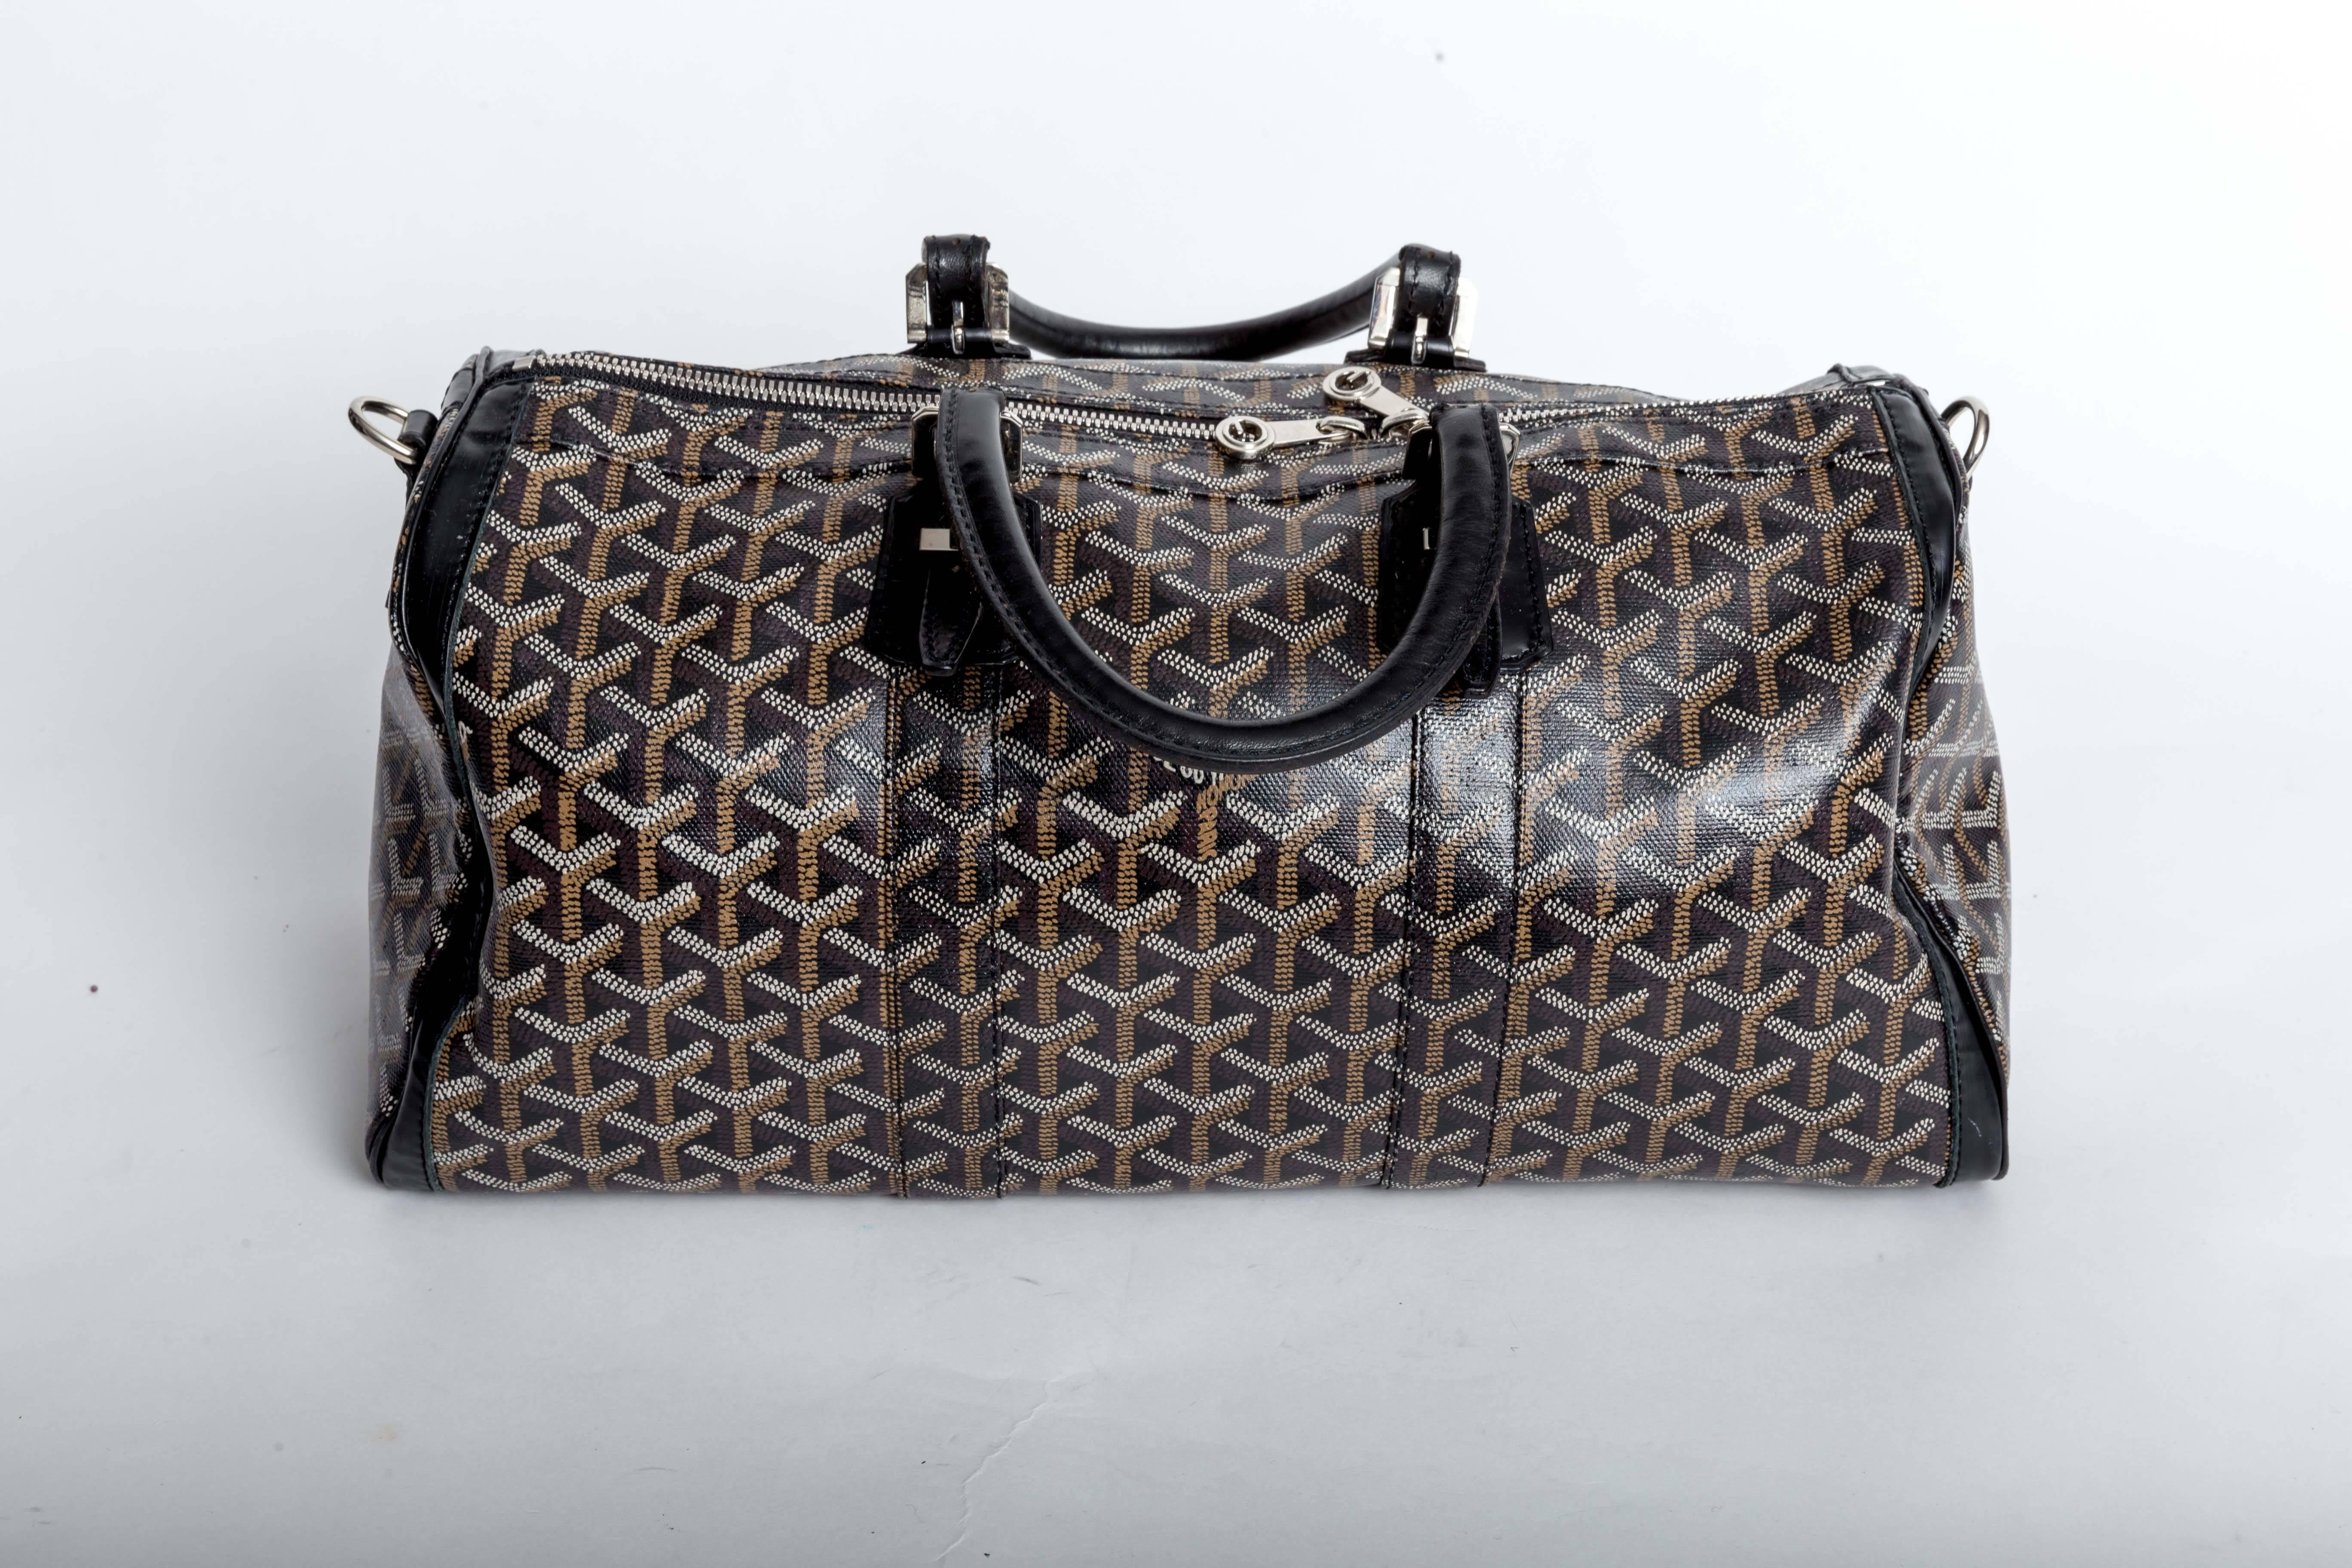  Goyard Croisiere Medium 35 Boston Bag Canvas/Leather Black  features a top zip closure, rolled leather handles with adjustable buckle closures and is trimmed in matching leather. The canvas interior has one zip pocket. Removeable shoulder strap